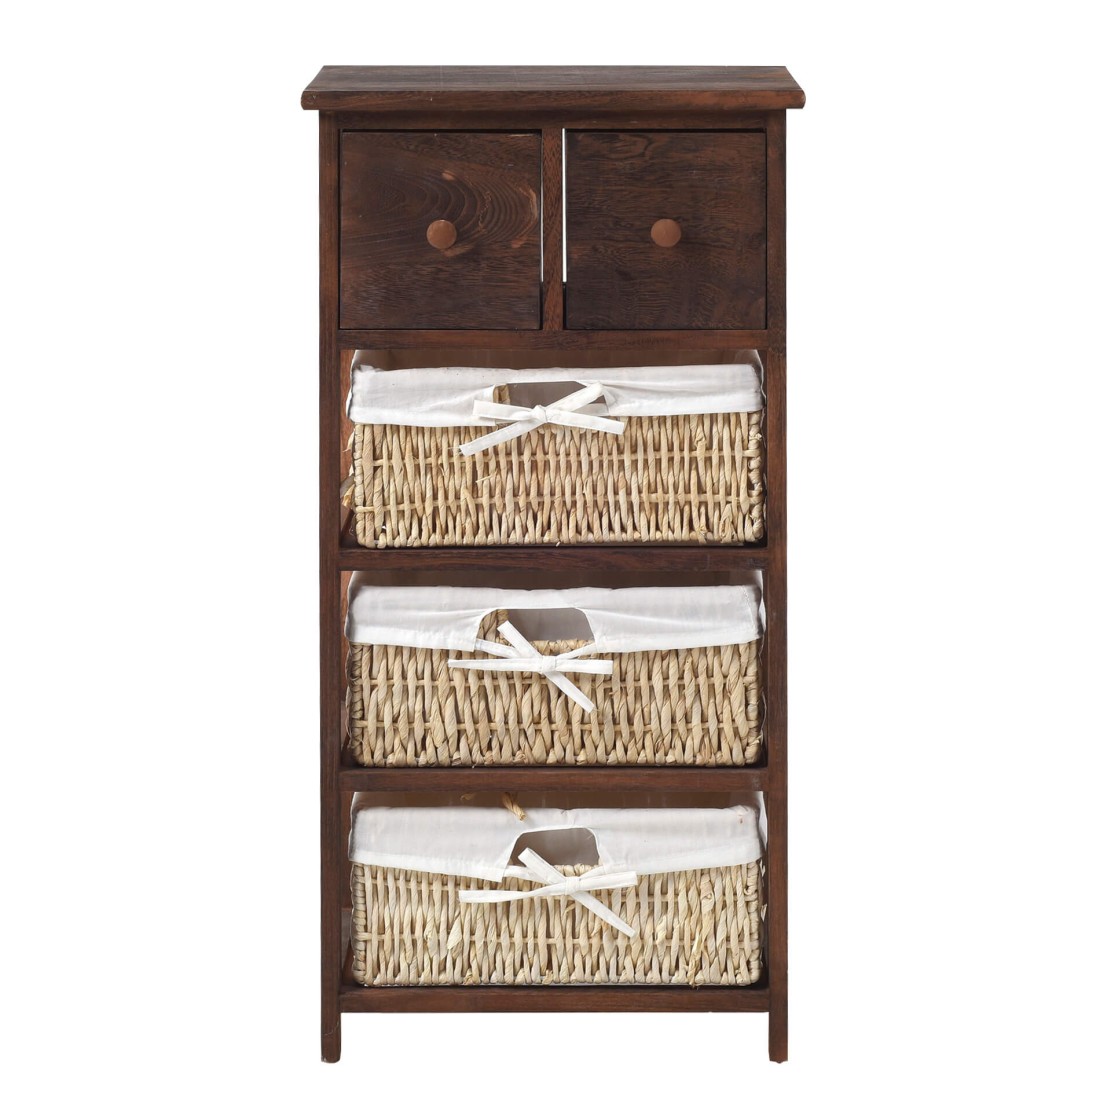 Brown wicker cabinet with 2 drawers and 3 baskets